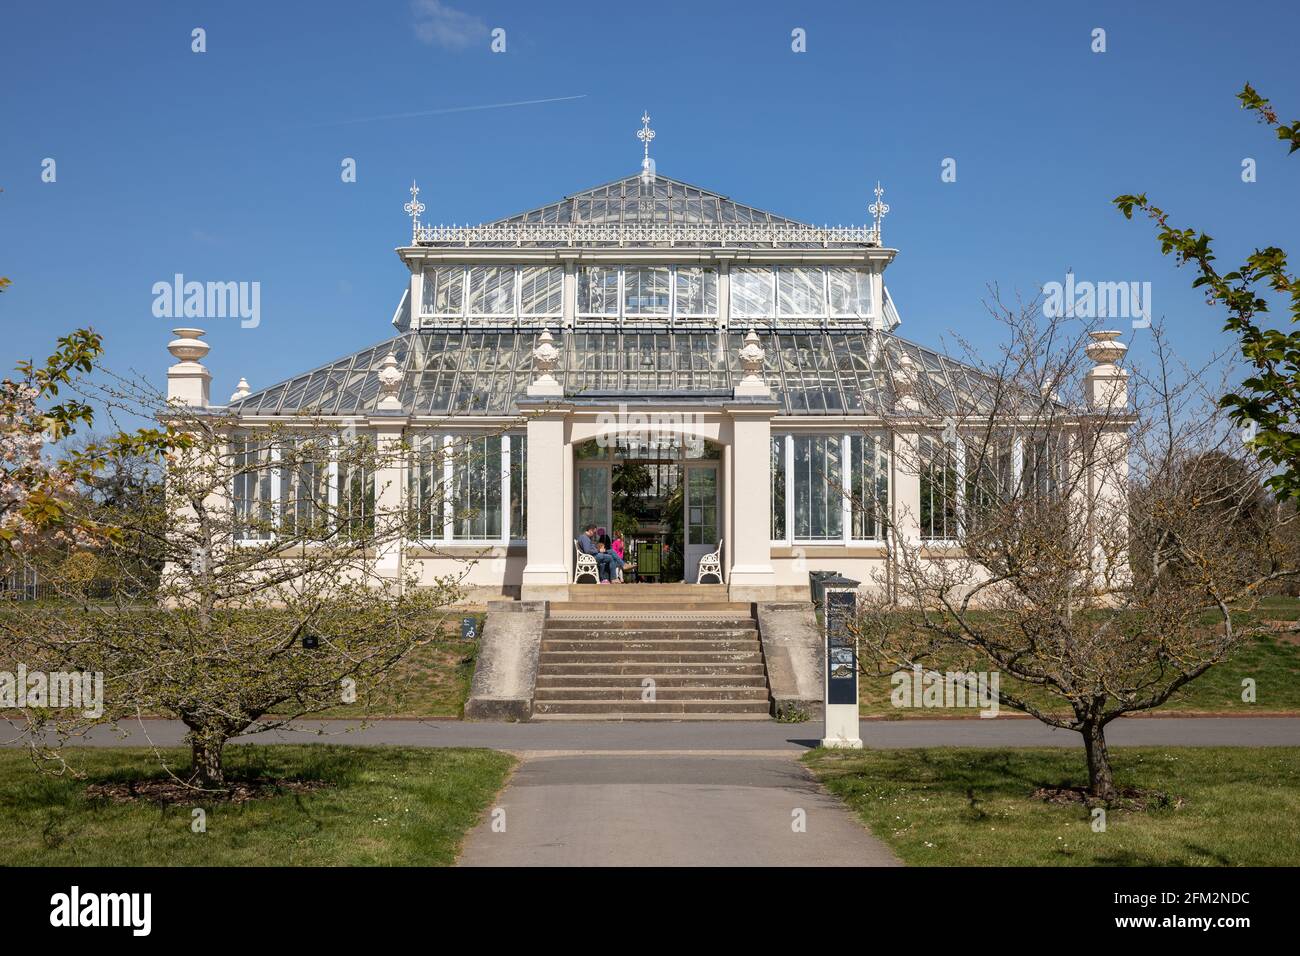 The Temperate House, Kew Royal Botanic Gardens, Londres, Royaume-Uni Banque D'Images